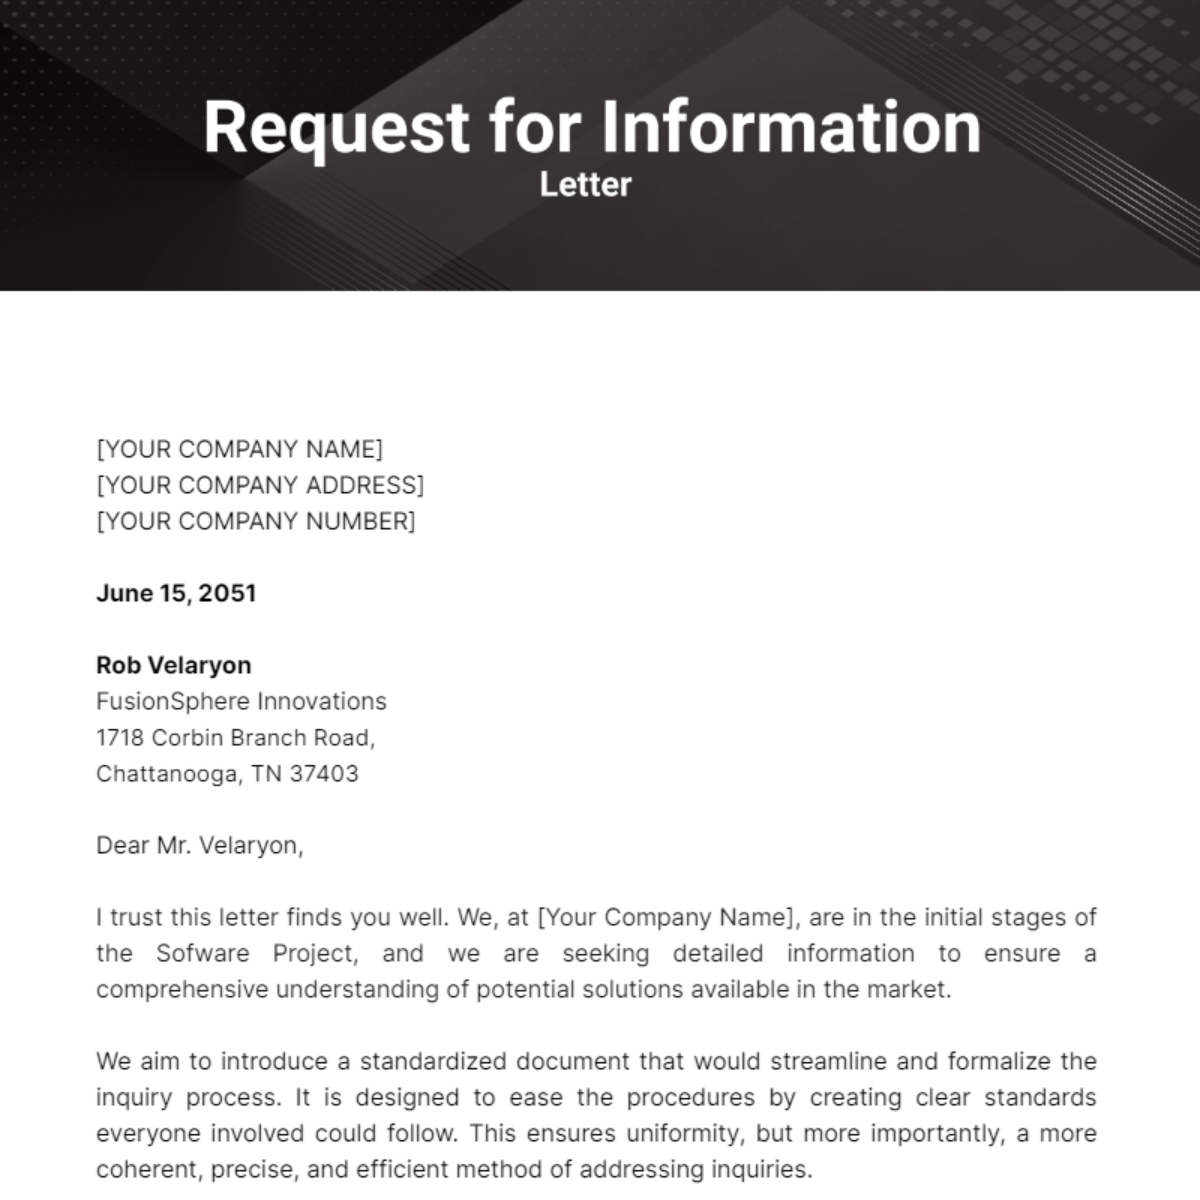 Request for Information Letter Template